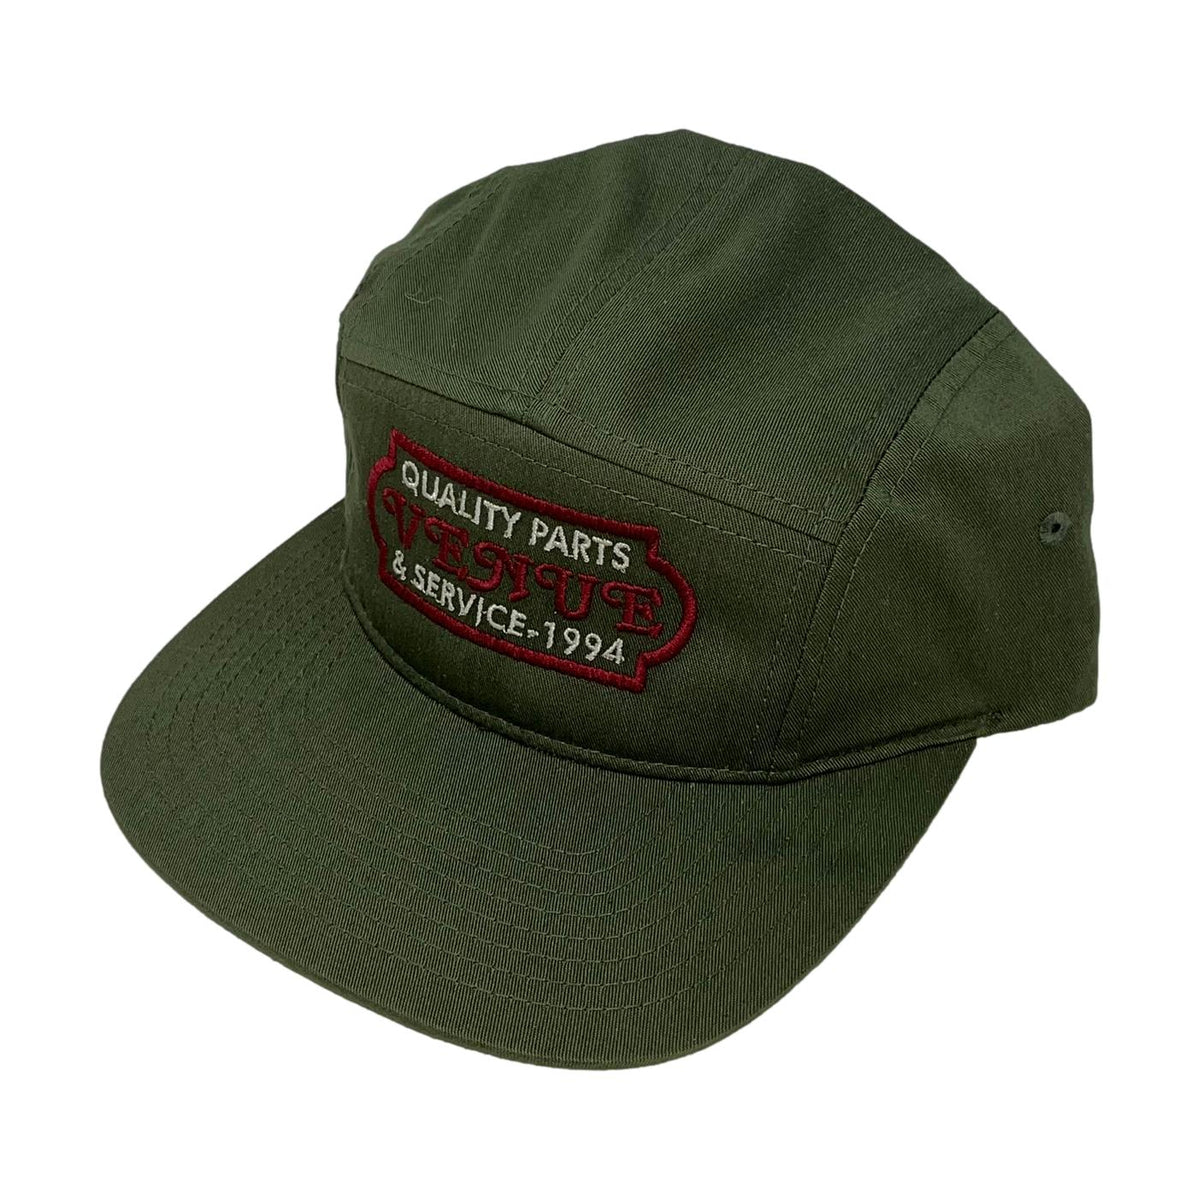 Venue Quality Parts Embroidered 5 Panel Hat Army Olive